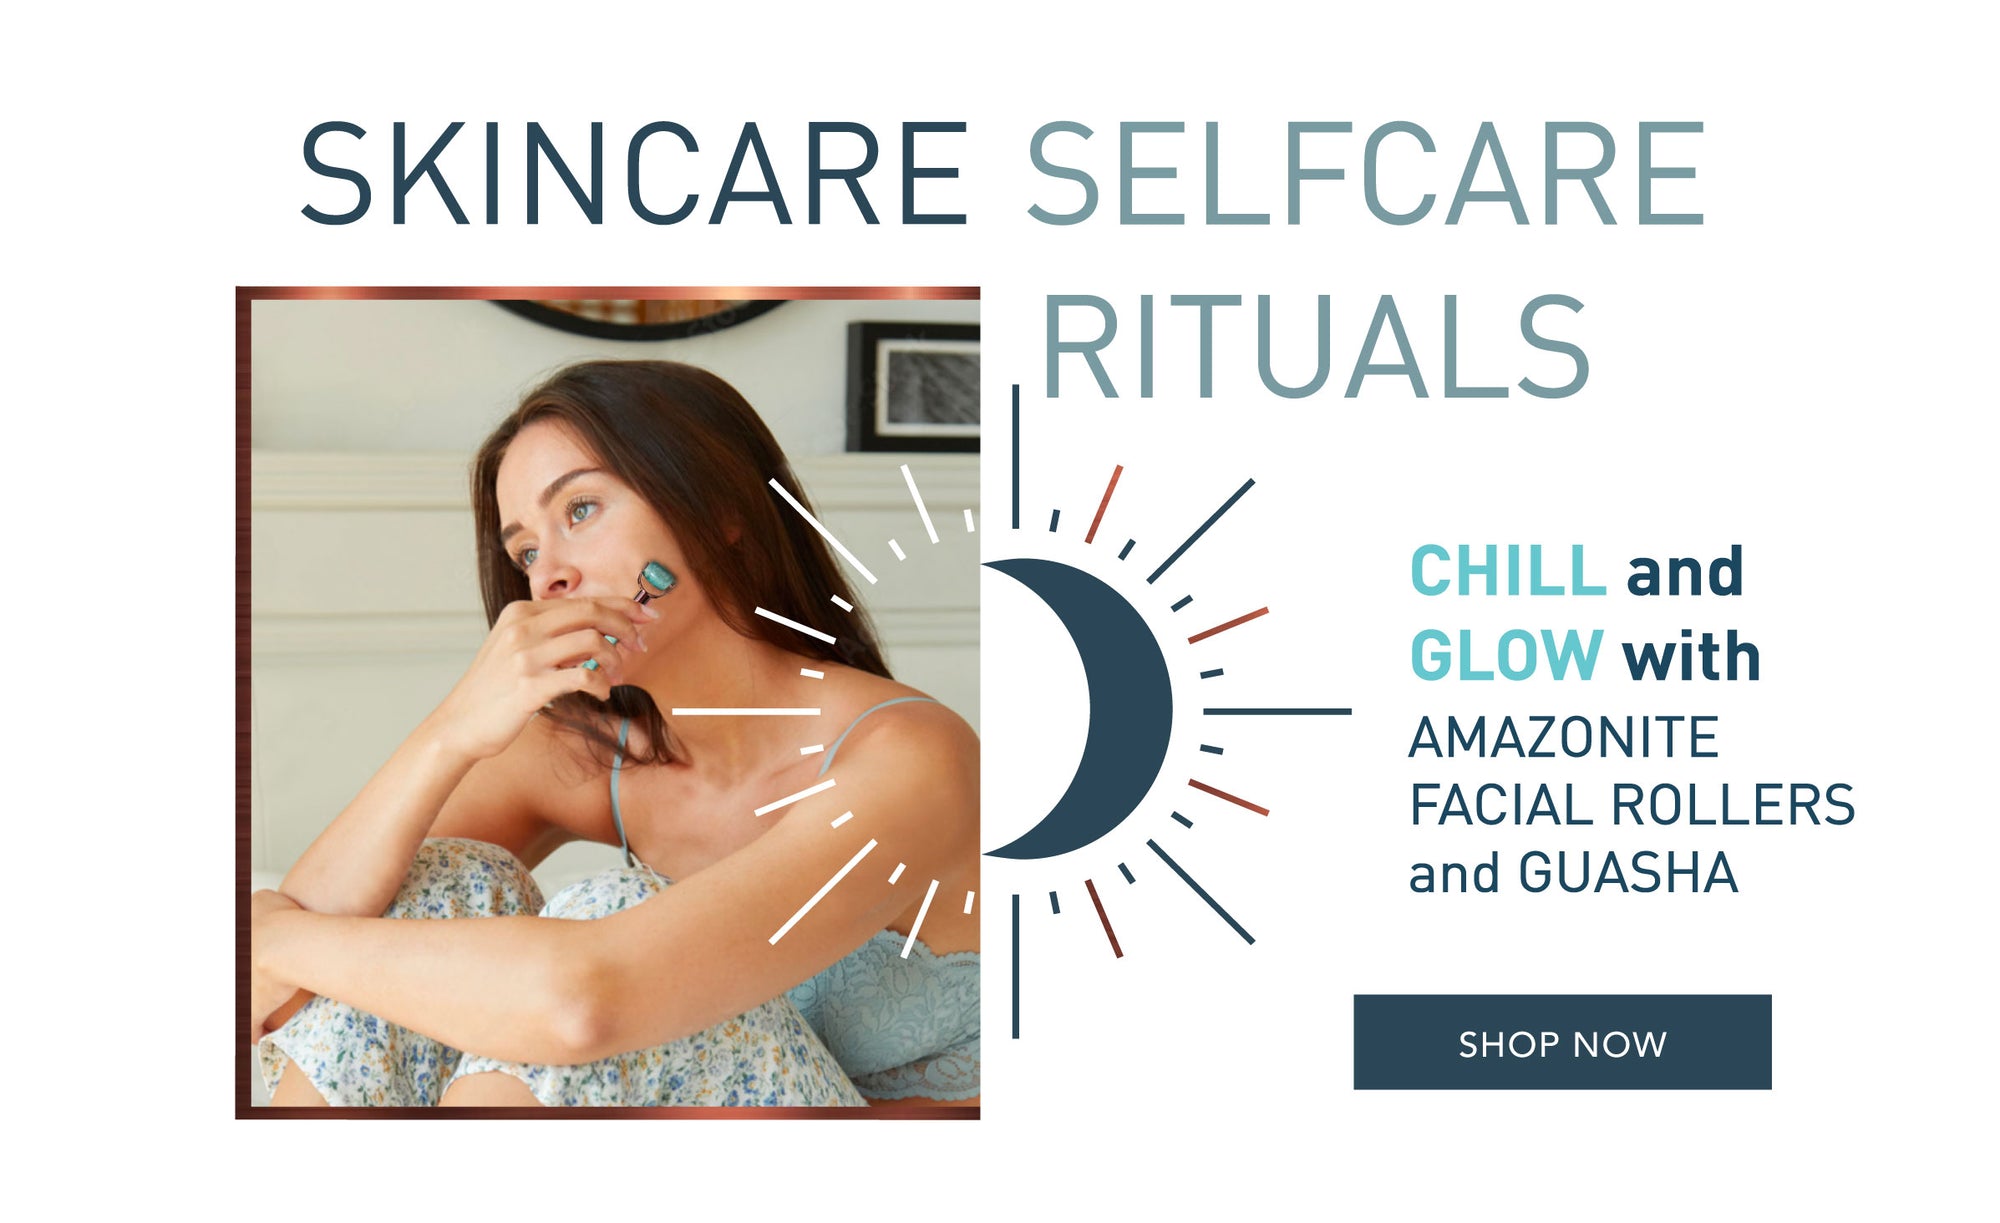 Woman using facial roller and link to shop Amazonite facial ritual tools